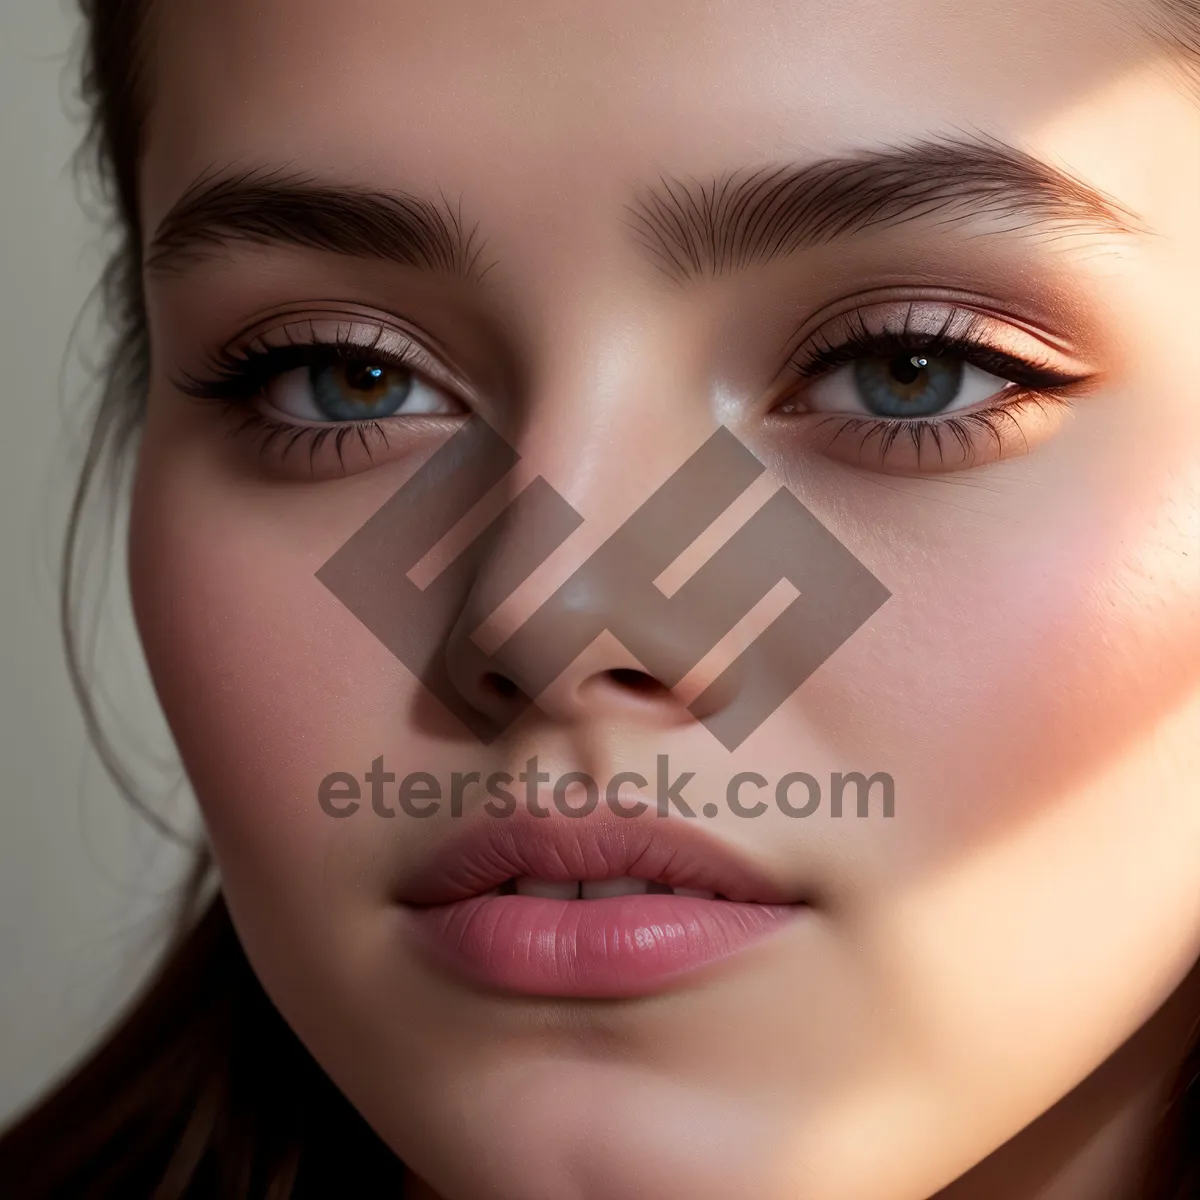 Picture of Glamorous Beauty: Captivating Portrait of Attractive Model with Flawless Skin